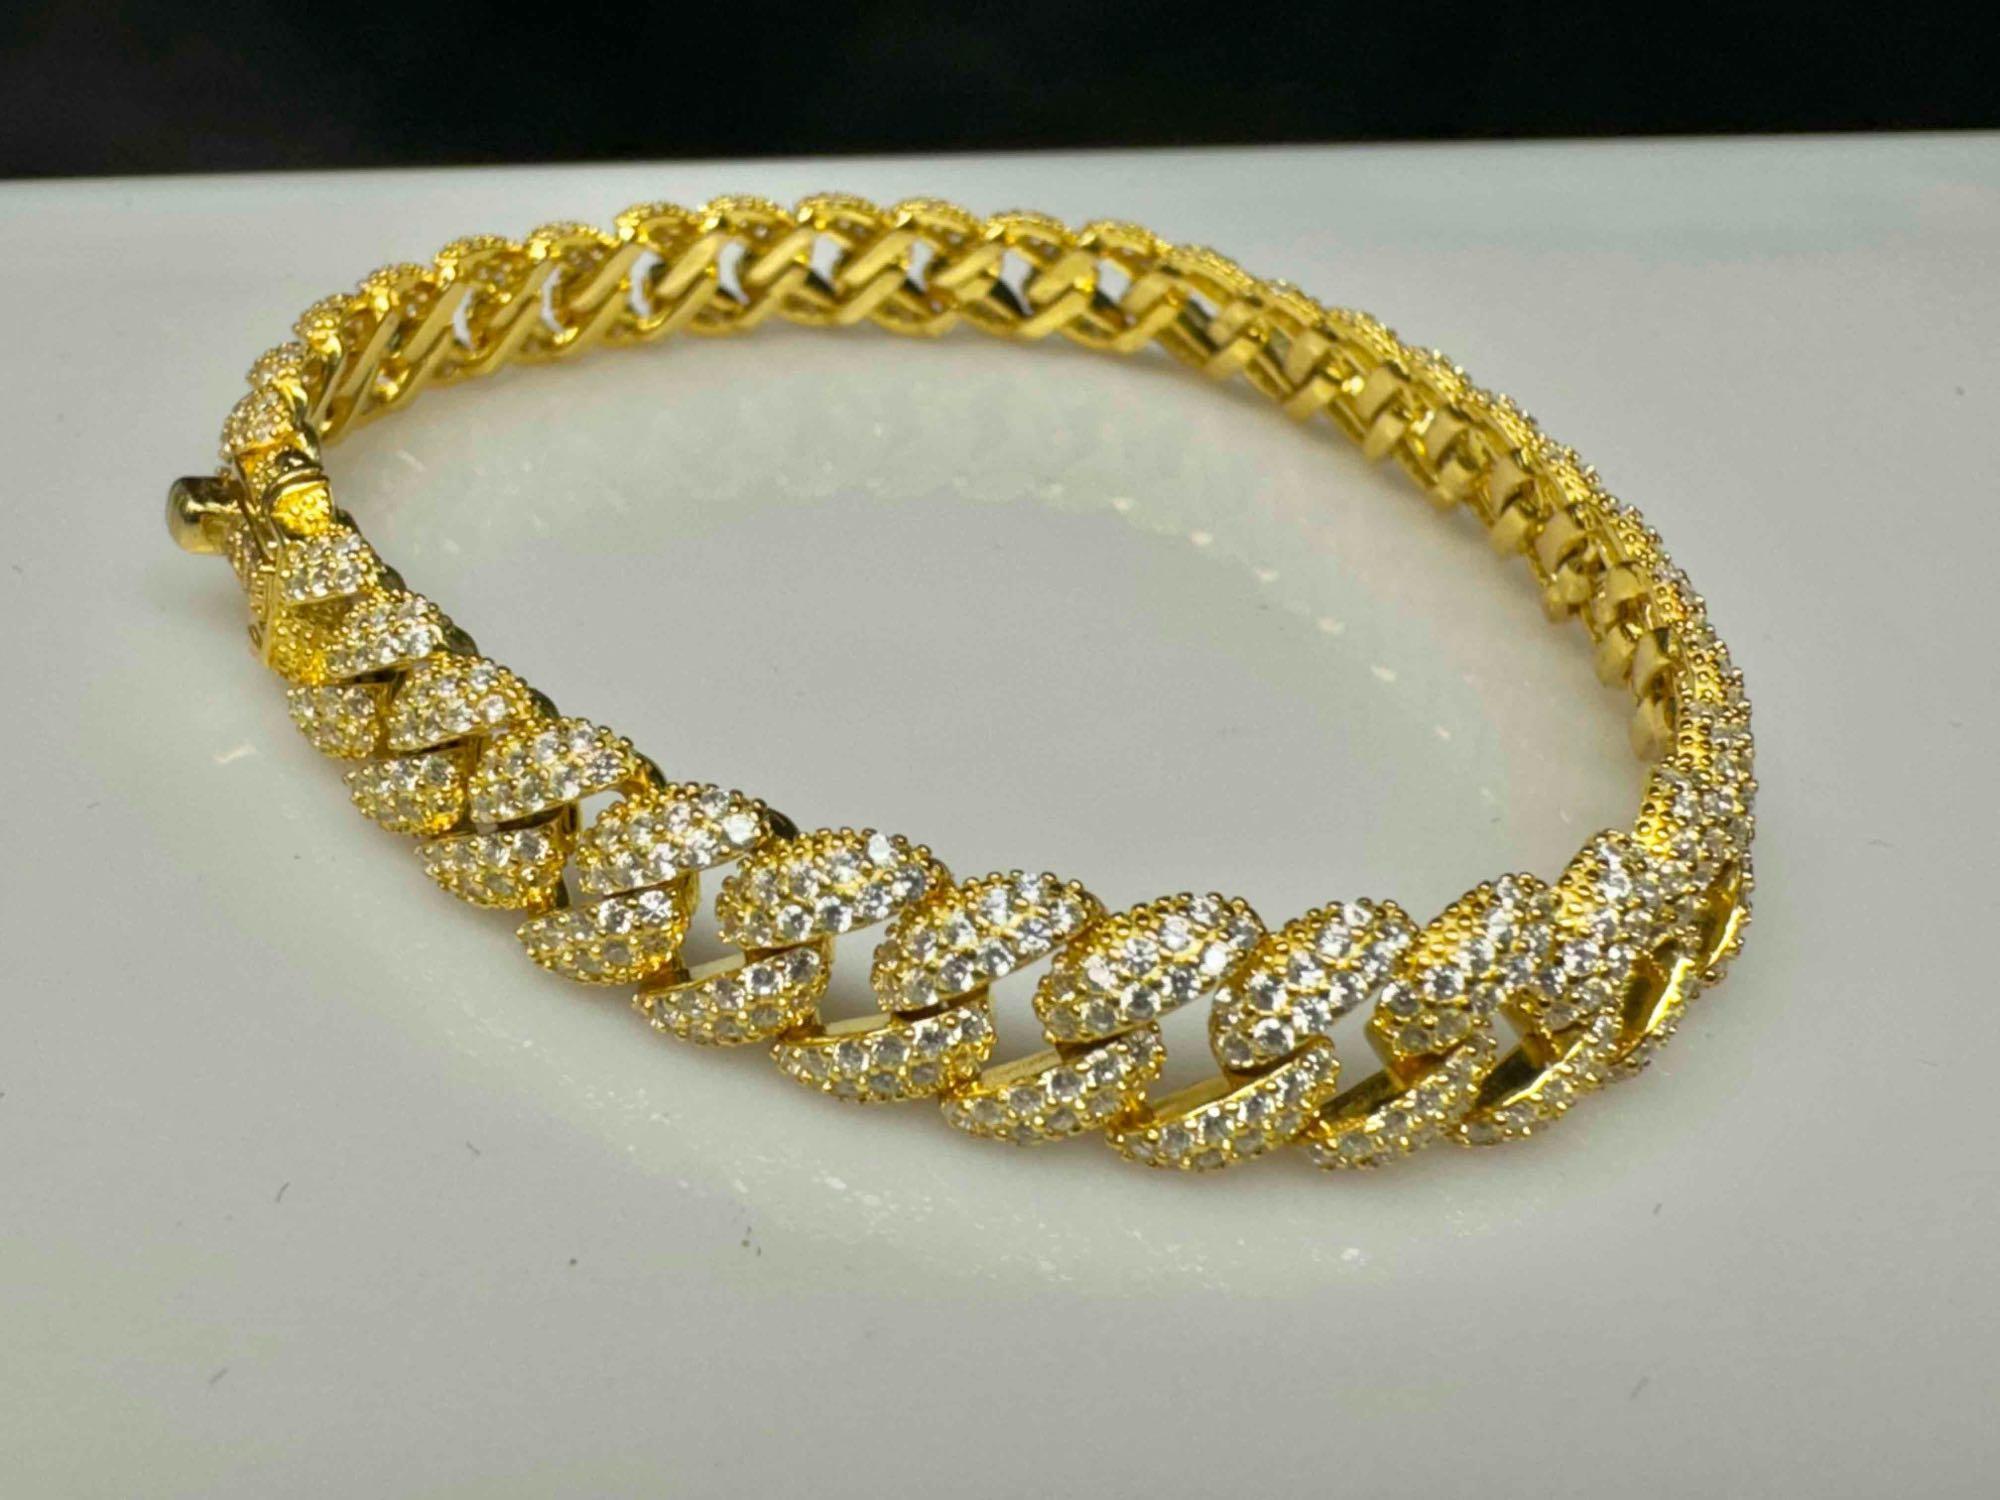 14k Gold Plated s925 Sterling Silver Bracelet with Moissanite Diamonds 16.4g total